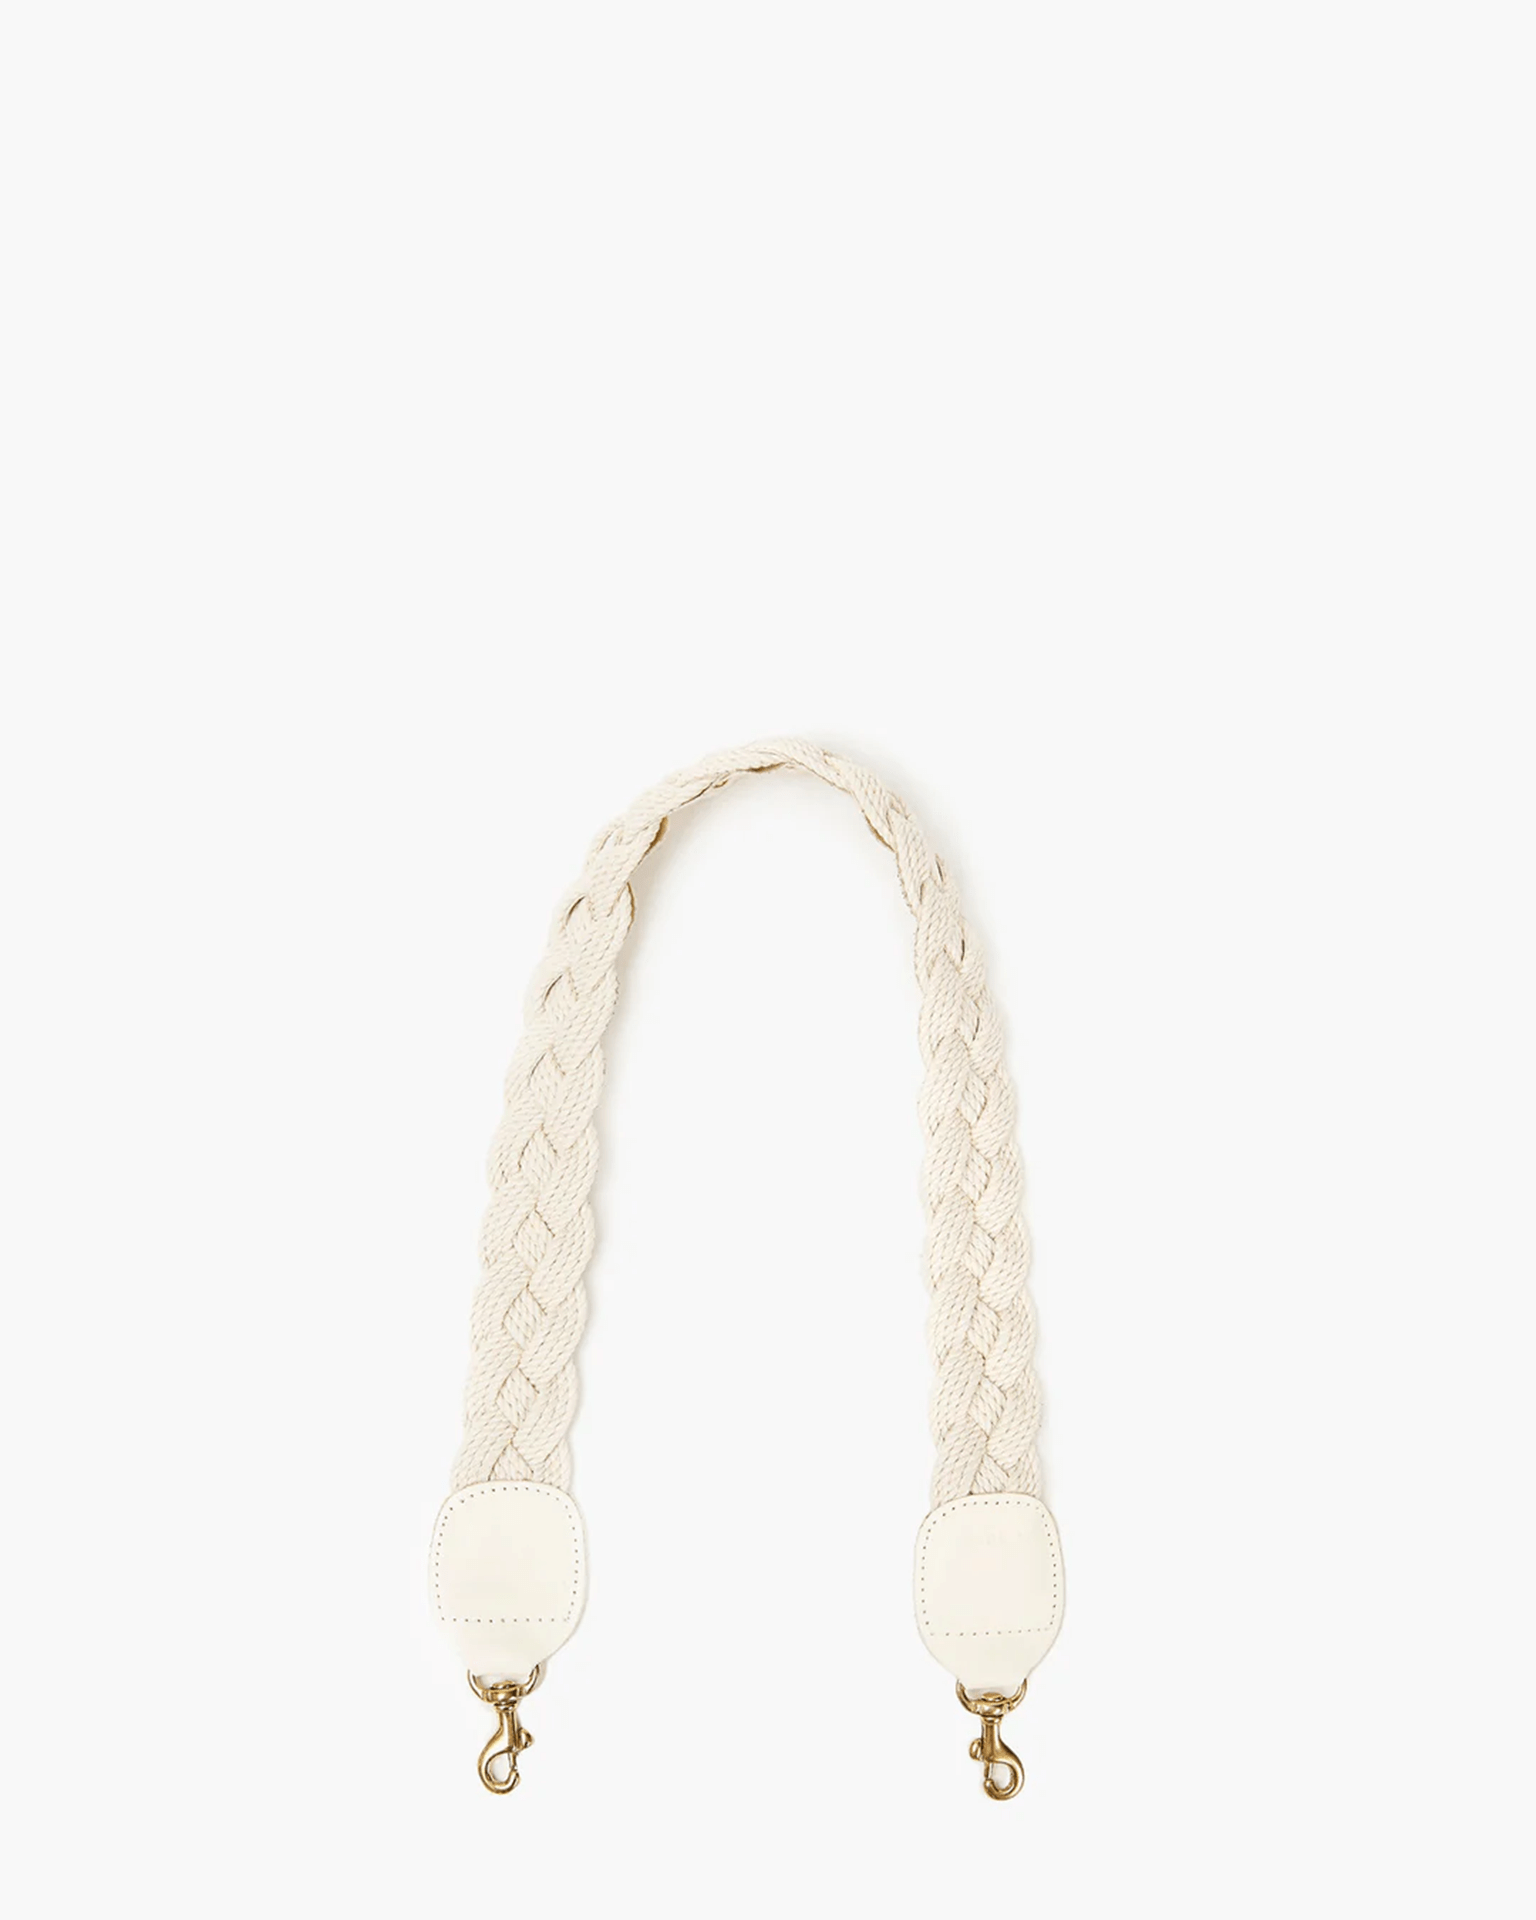 Braided Rope Shoulder Strap in Cream w/ Ltr Tabs